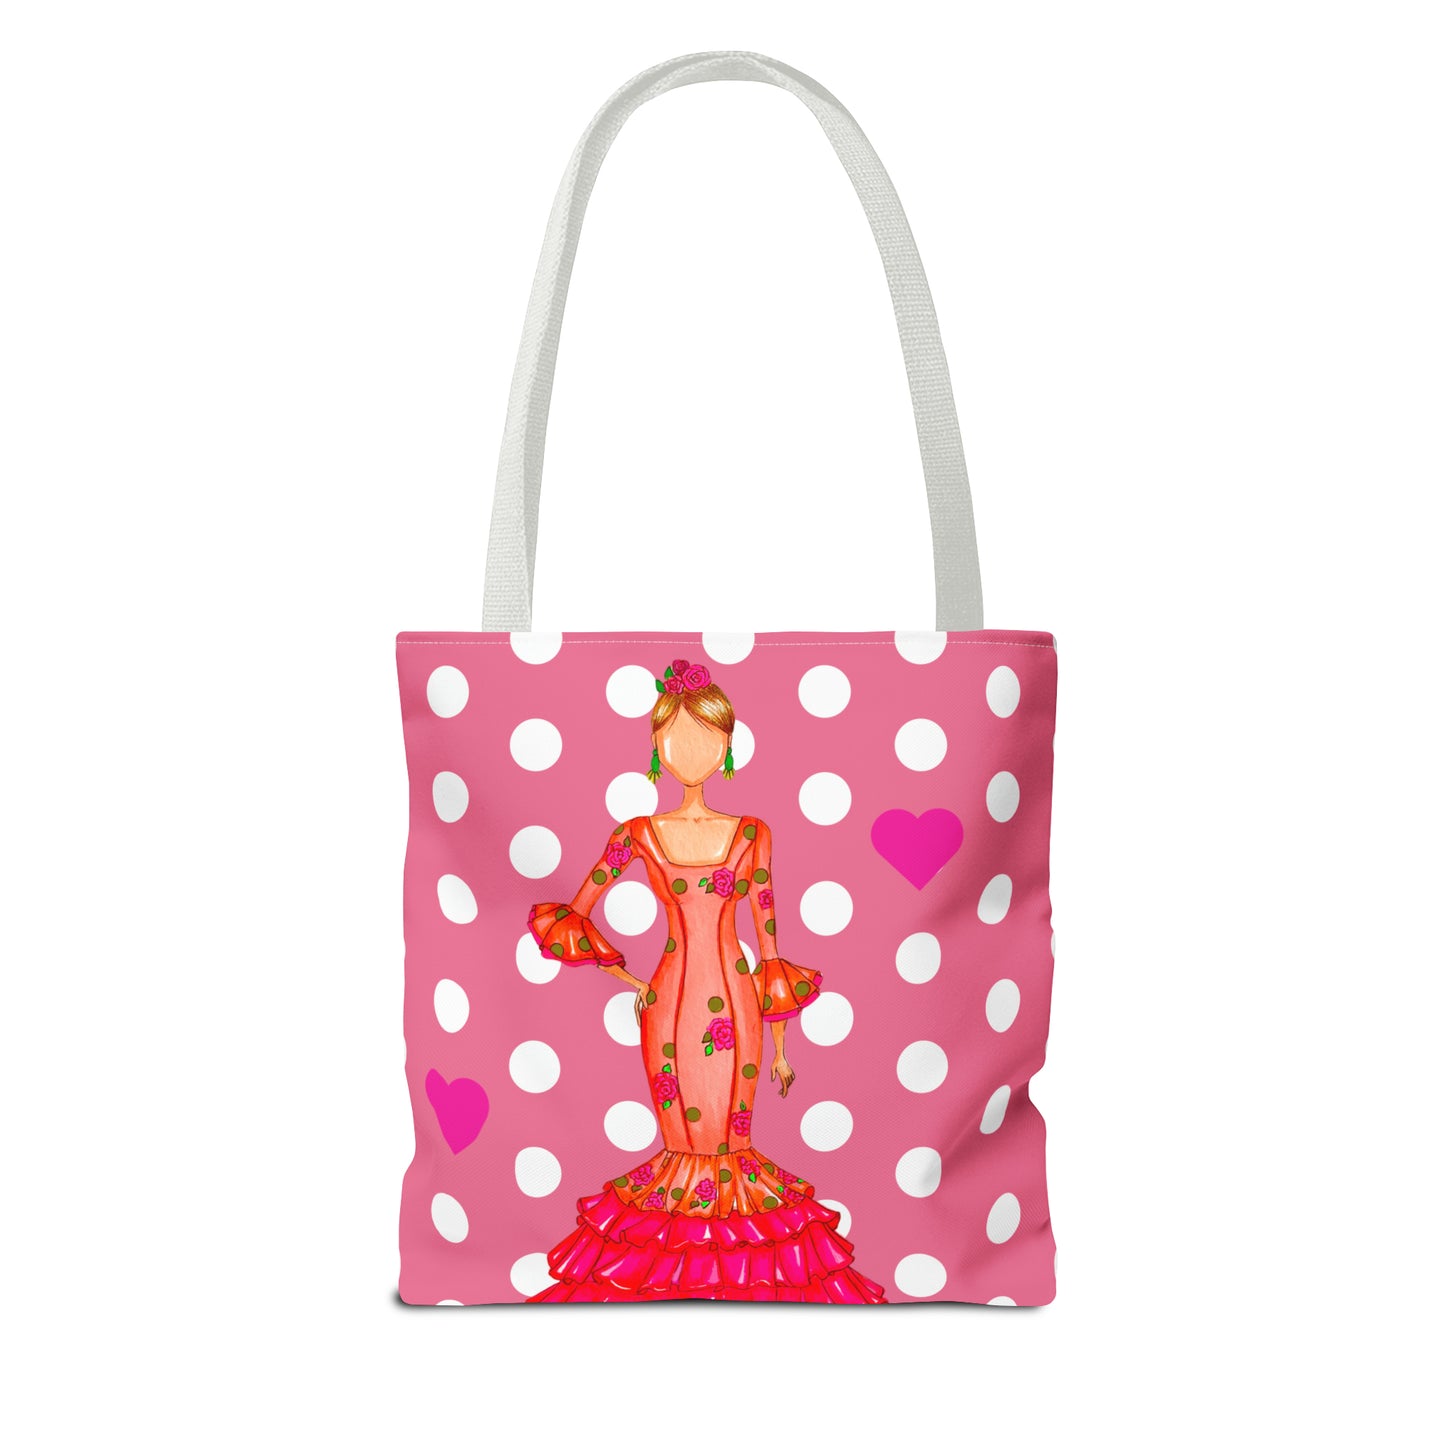 a pink polka dot bag with a picture of a woman on it